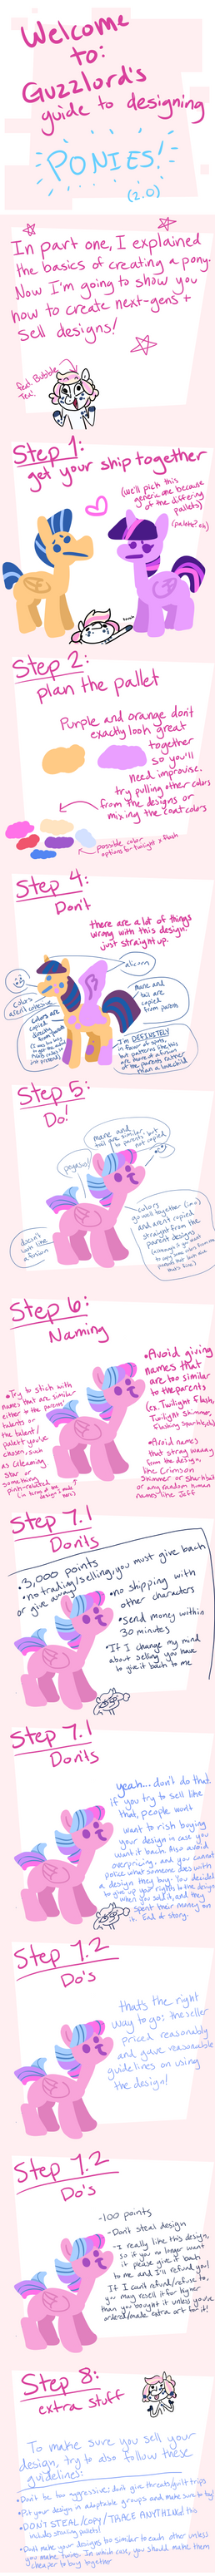 Pony Guide 2.0: Next Gen and Selling by bishopony on DeviantArt